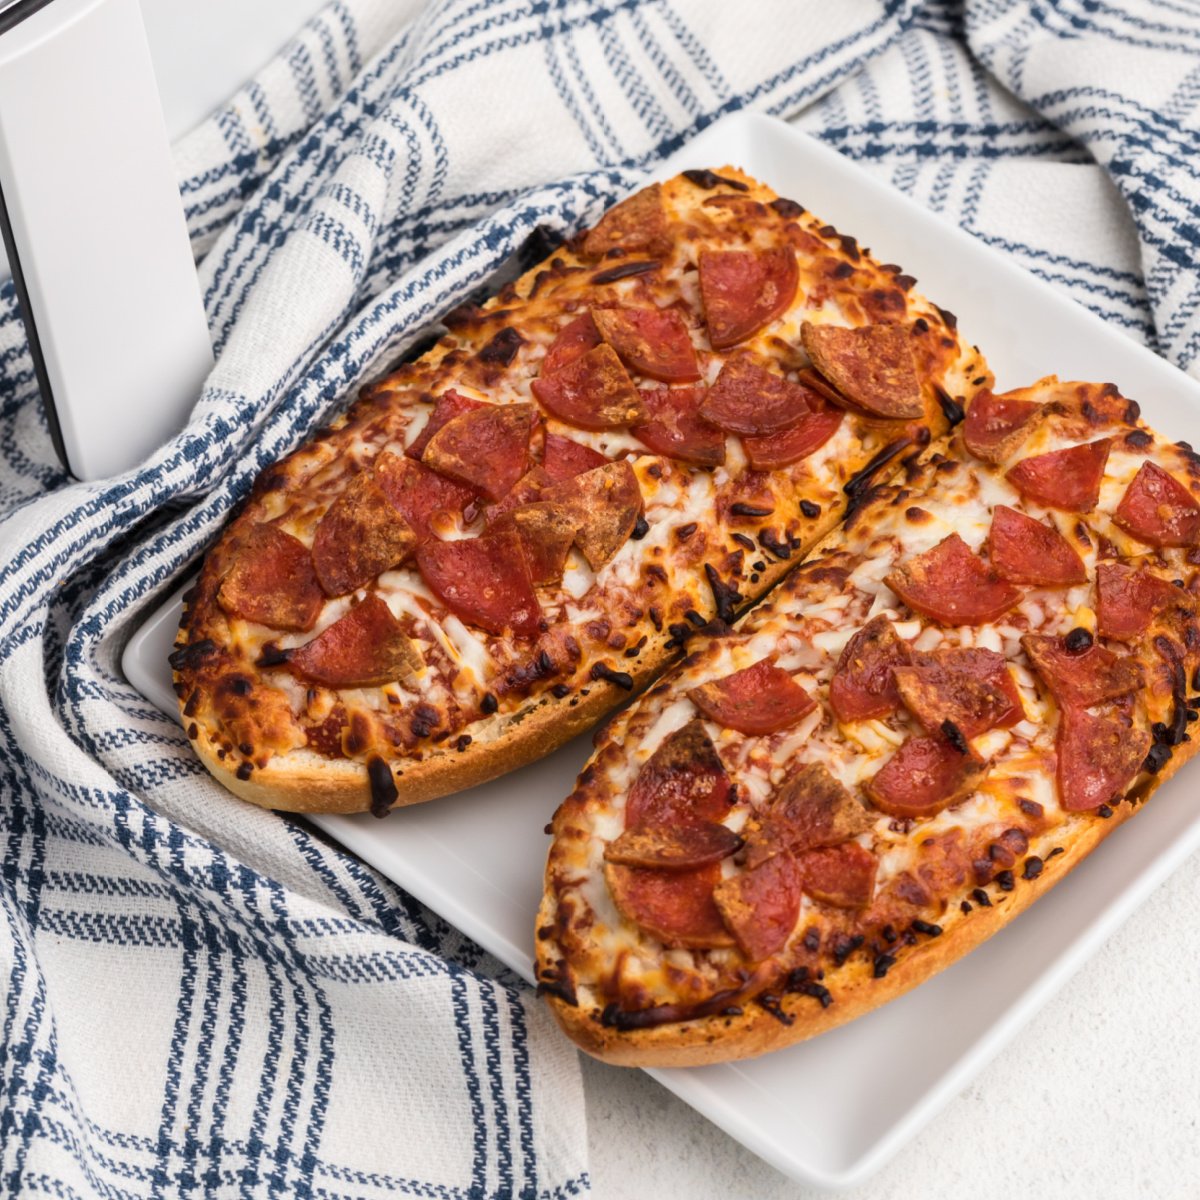 french bread pizza made in the air fryer and served on a white plate.